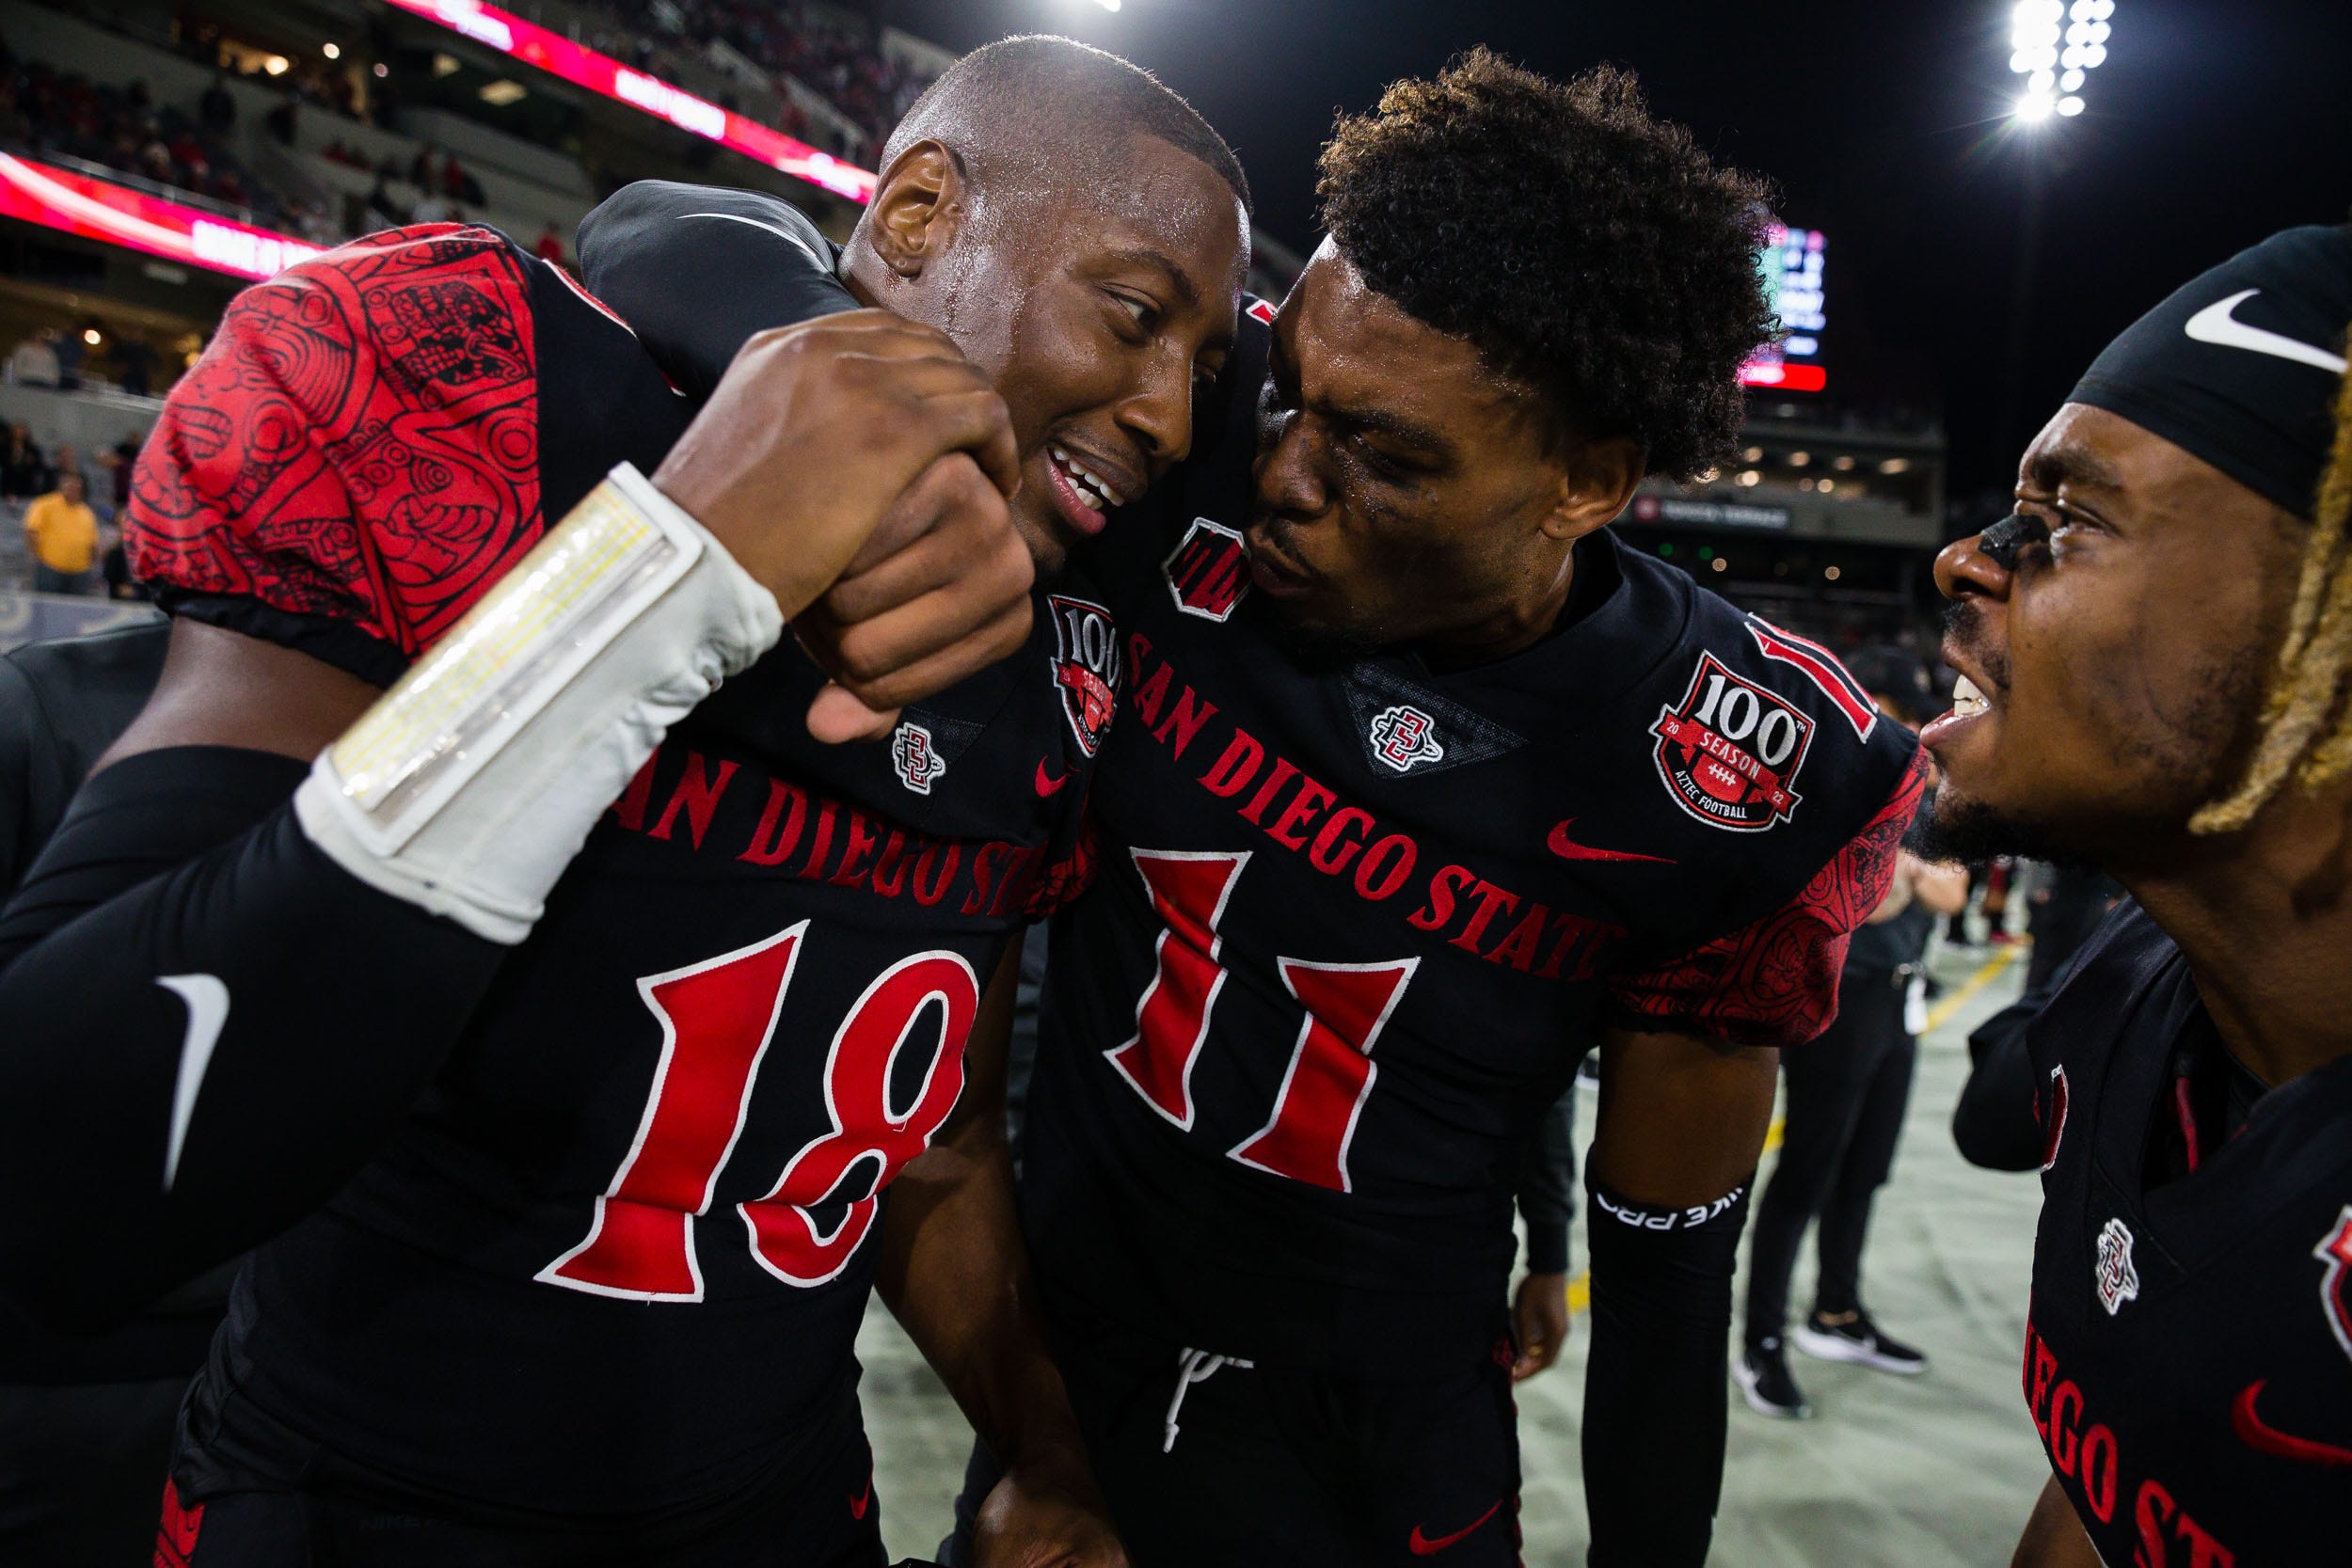 Canzano: San Diego State stays put for now